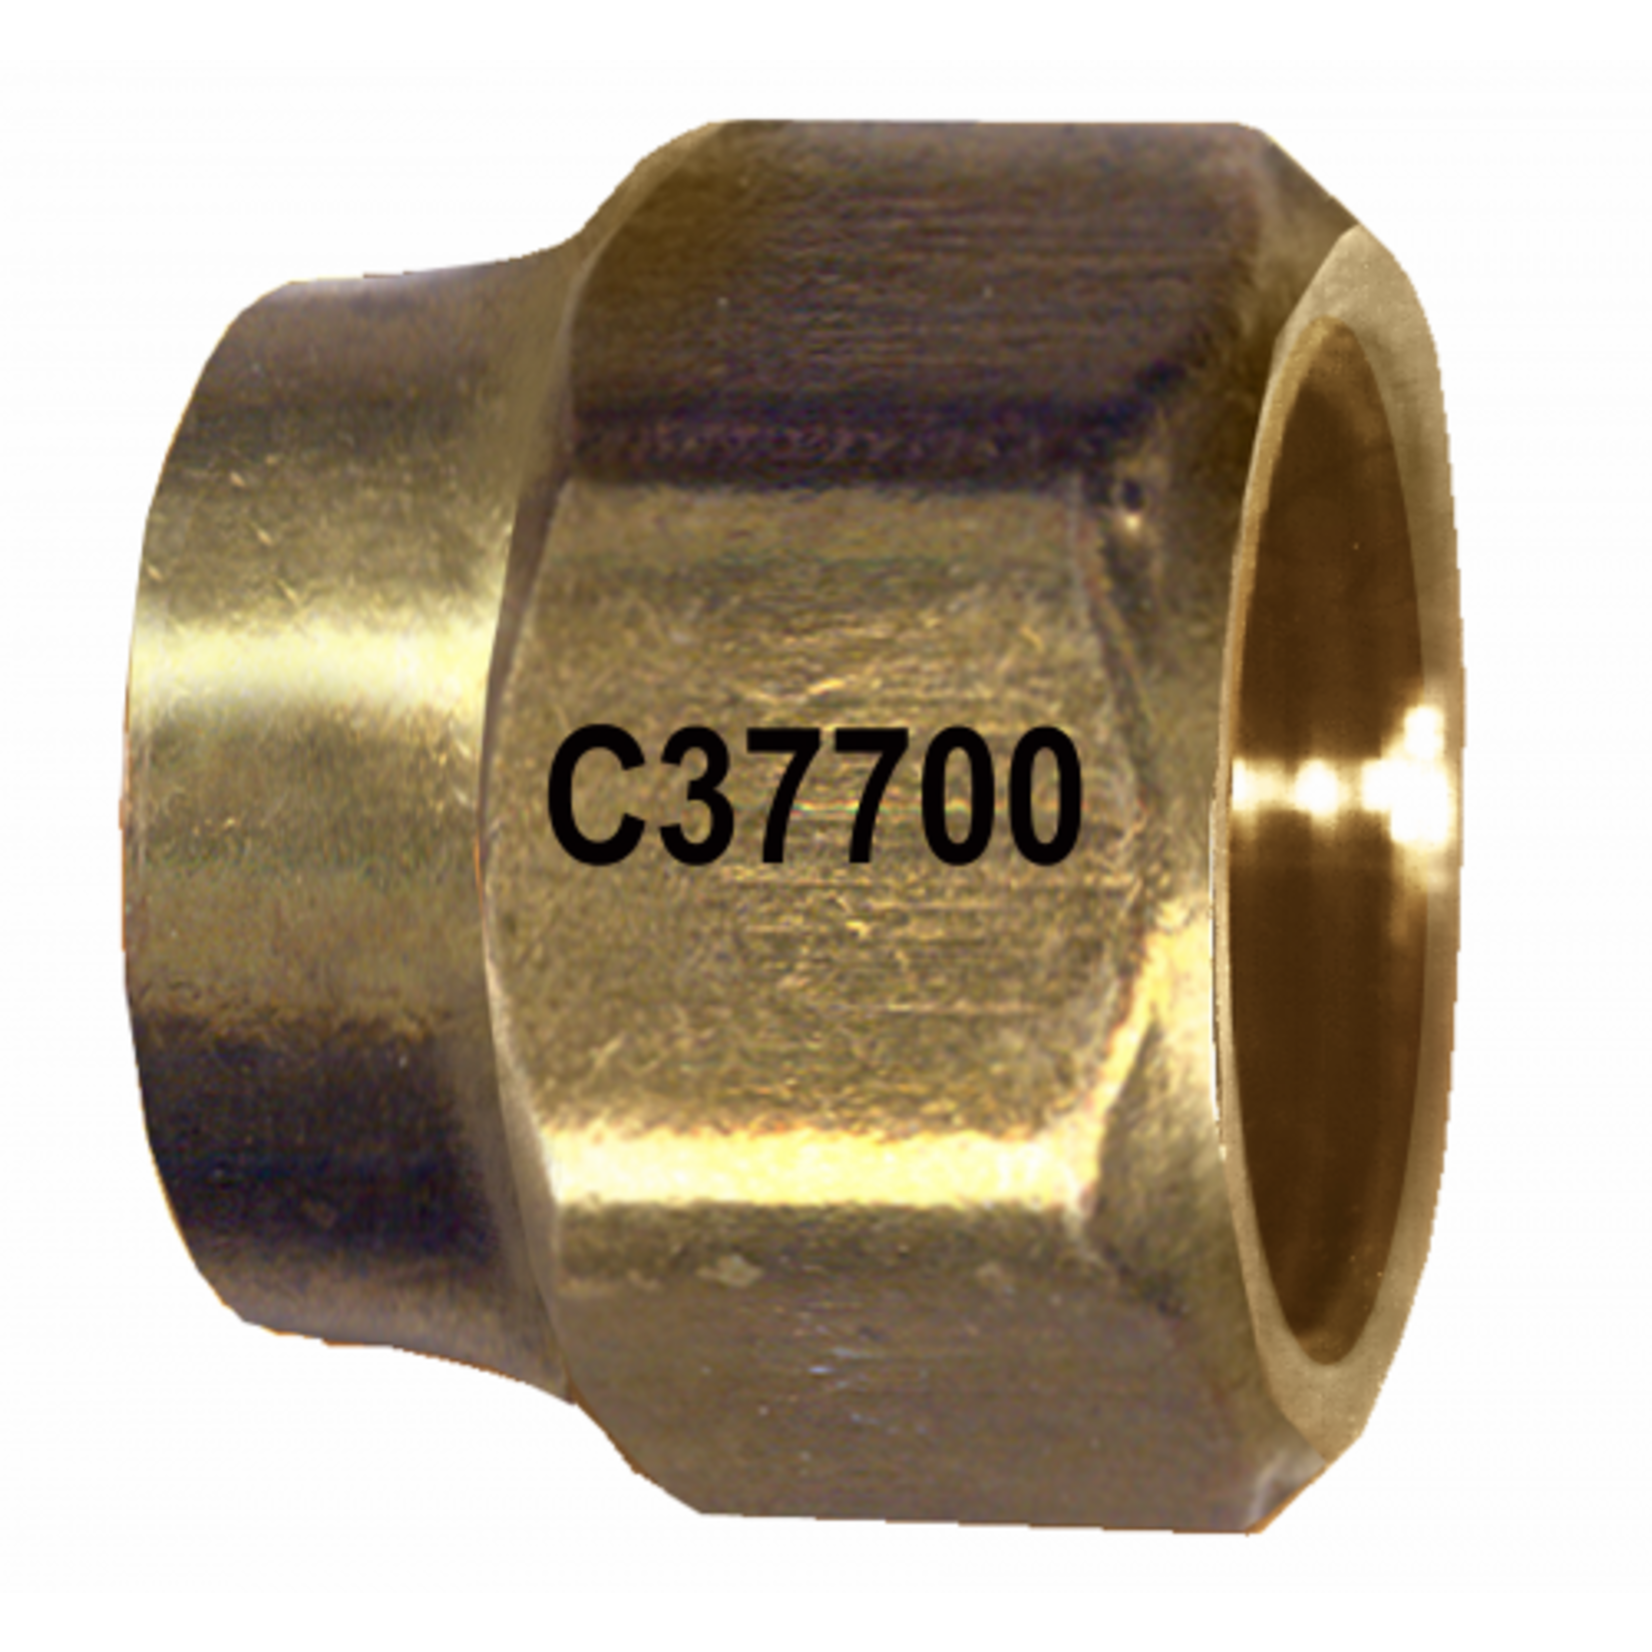 Fairview 5/8 Forged Nut